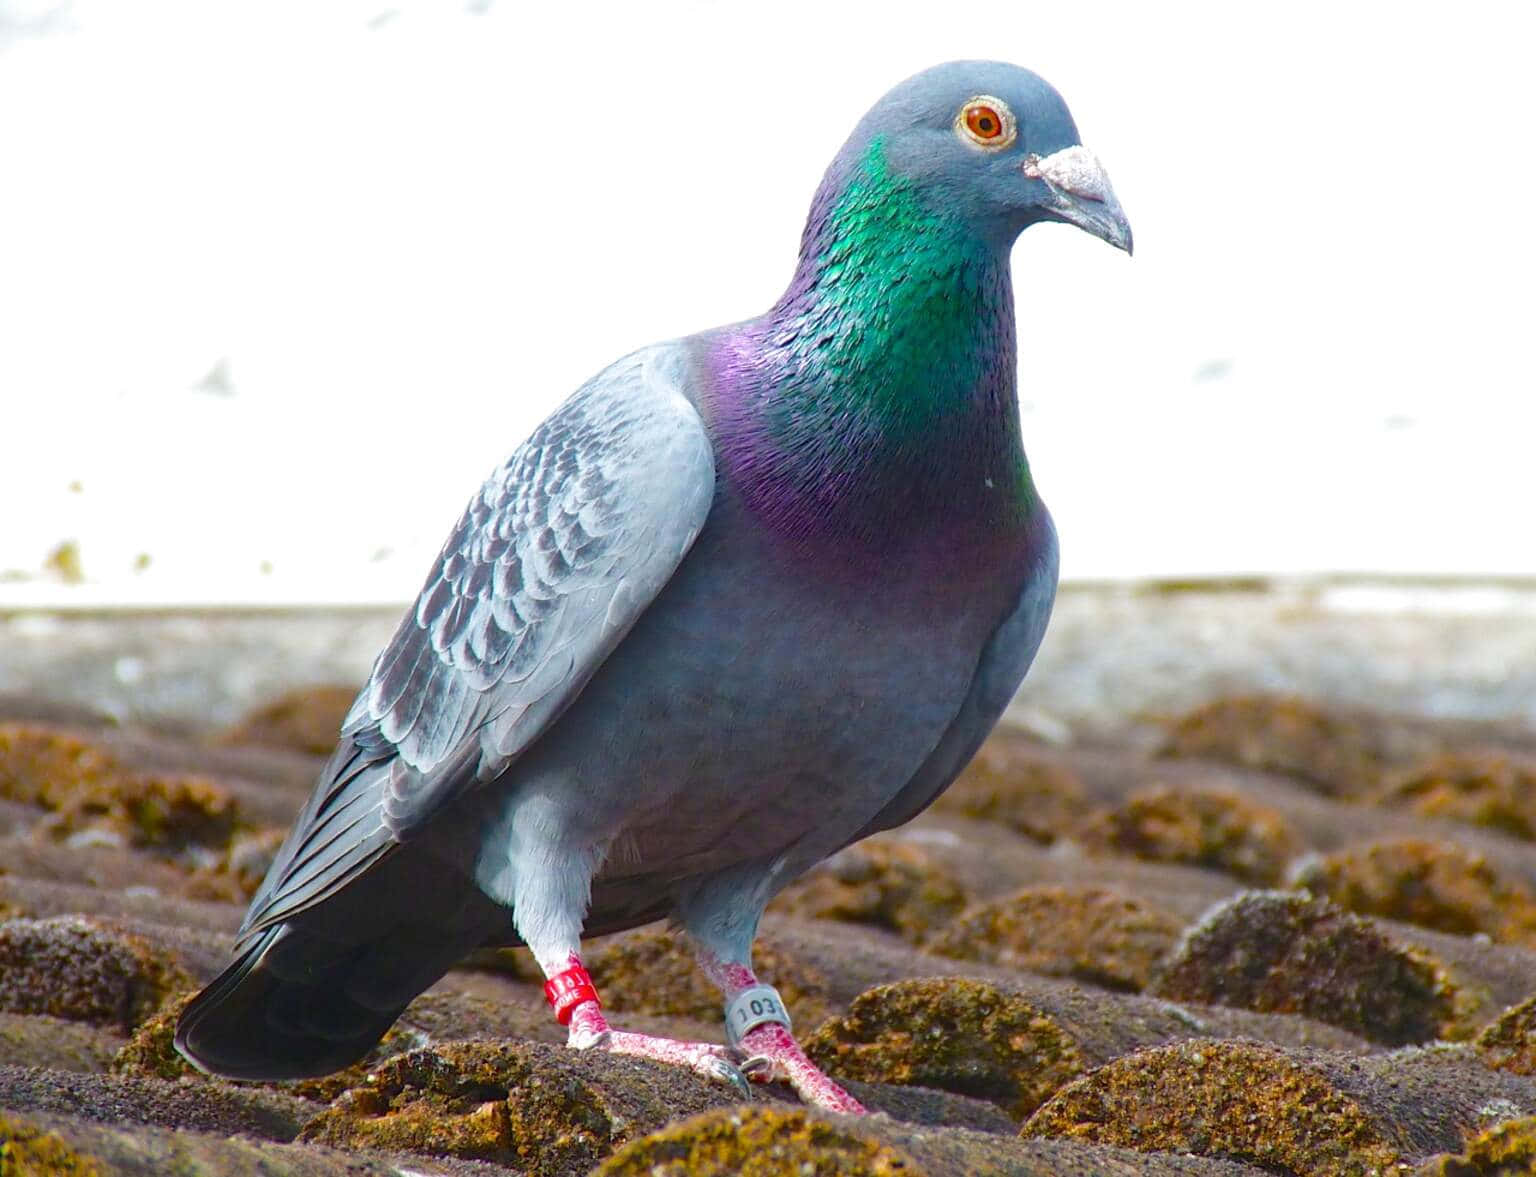 A friendly pigeon perched in the park